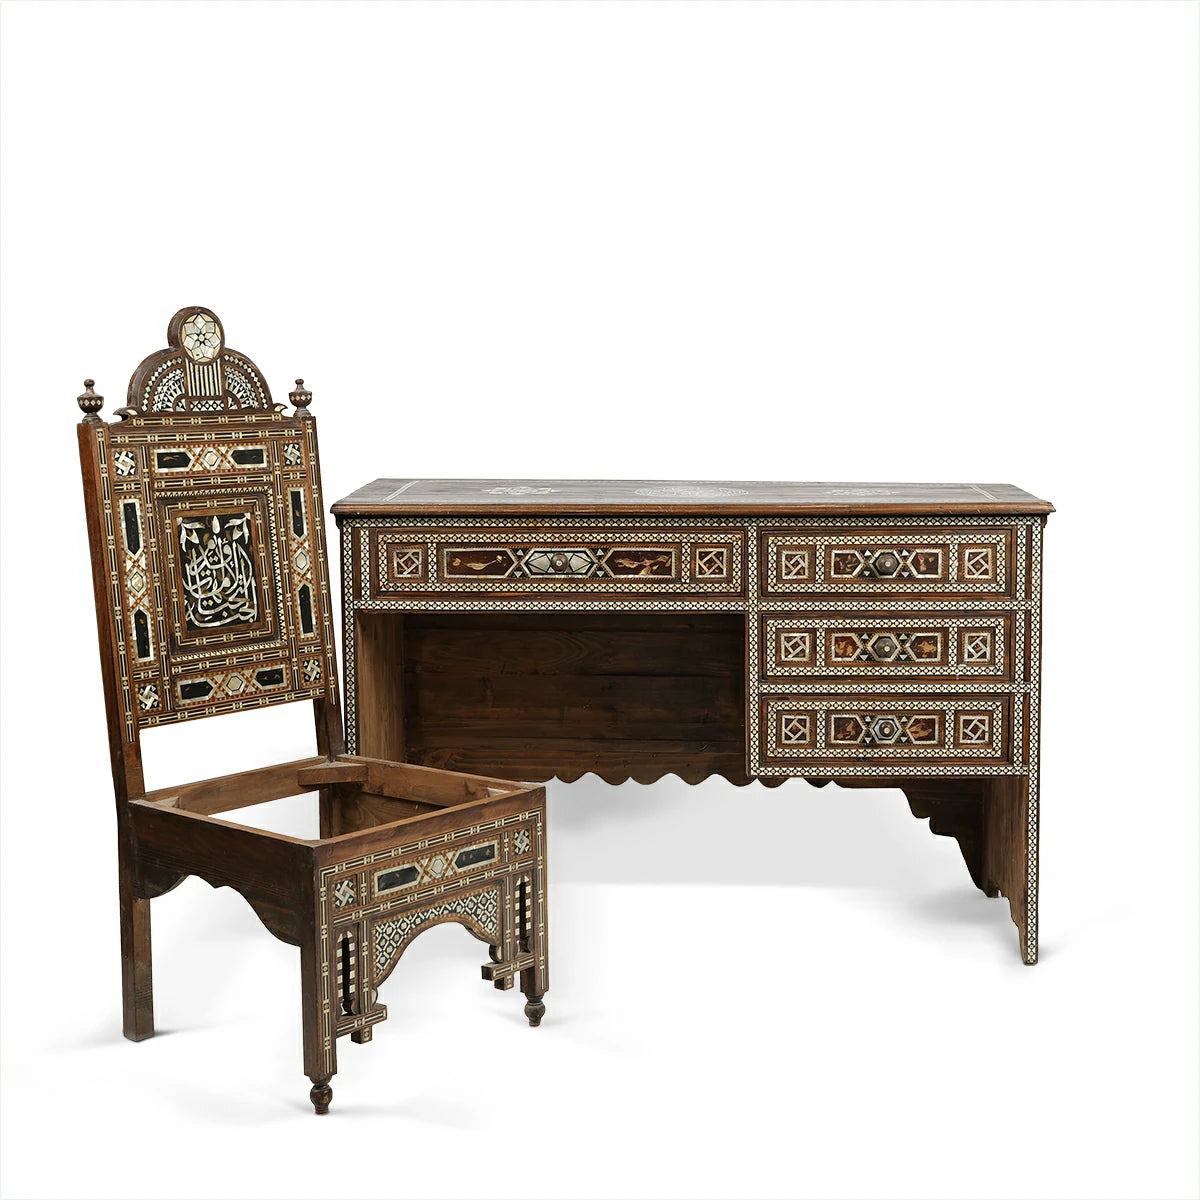 Straight View of Arabian Calligraphic Designed Desk and Chair Set